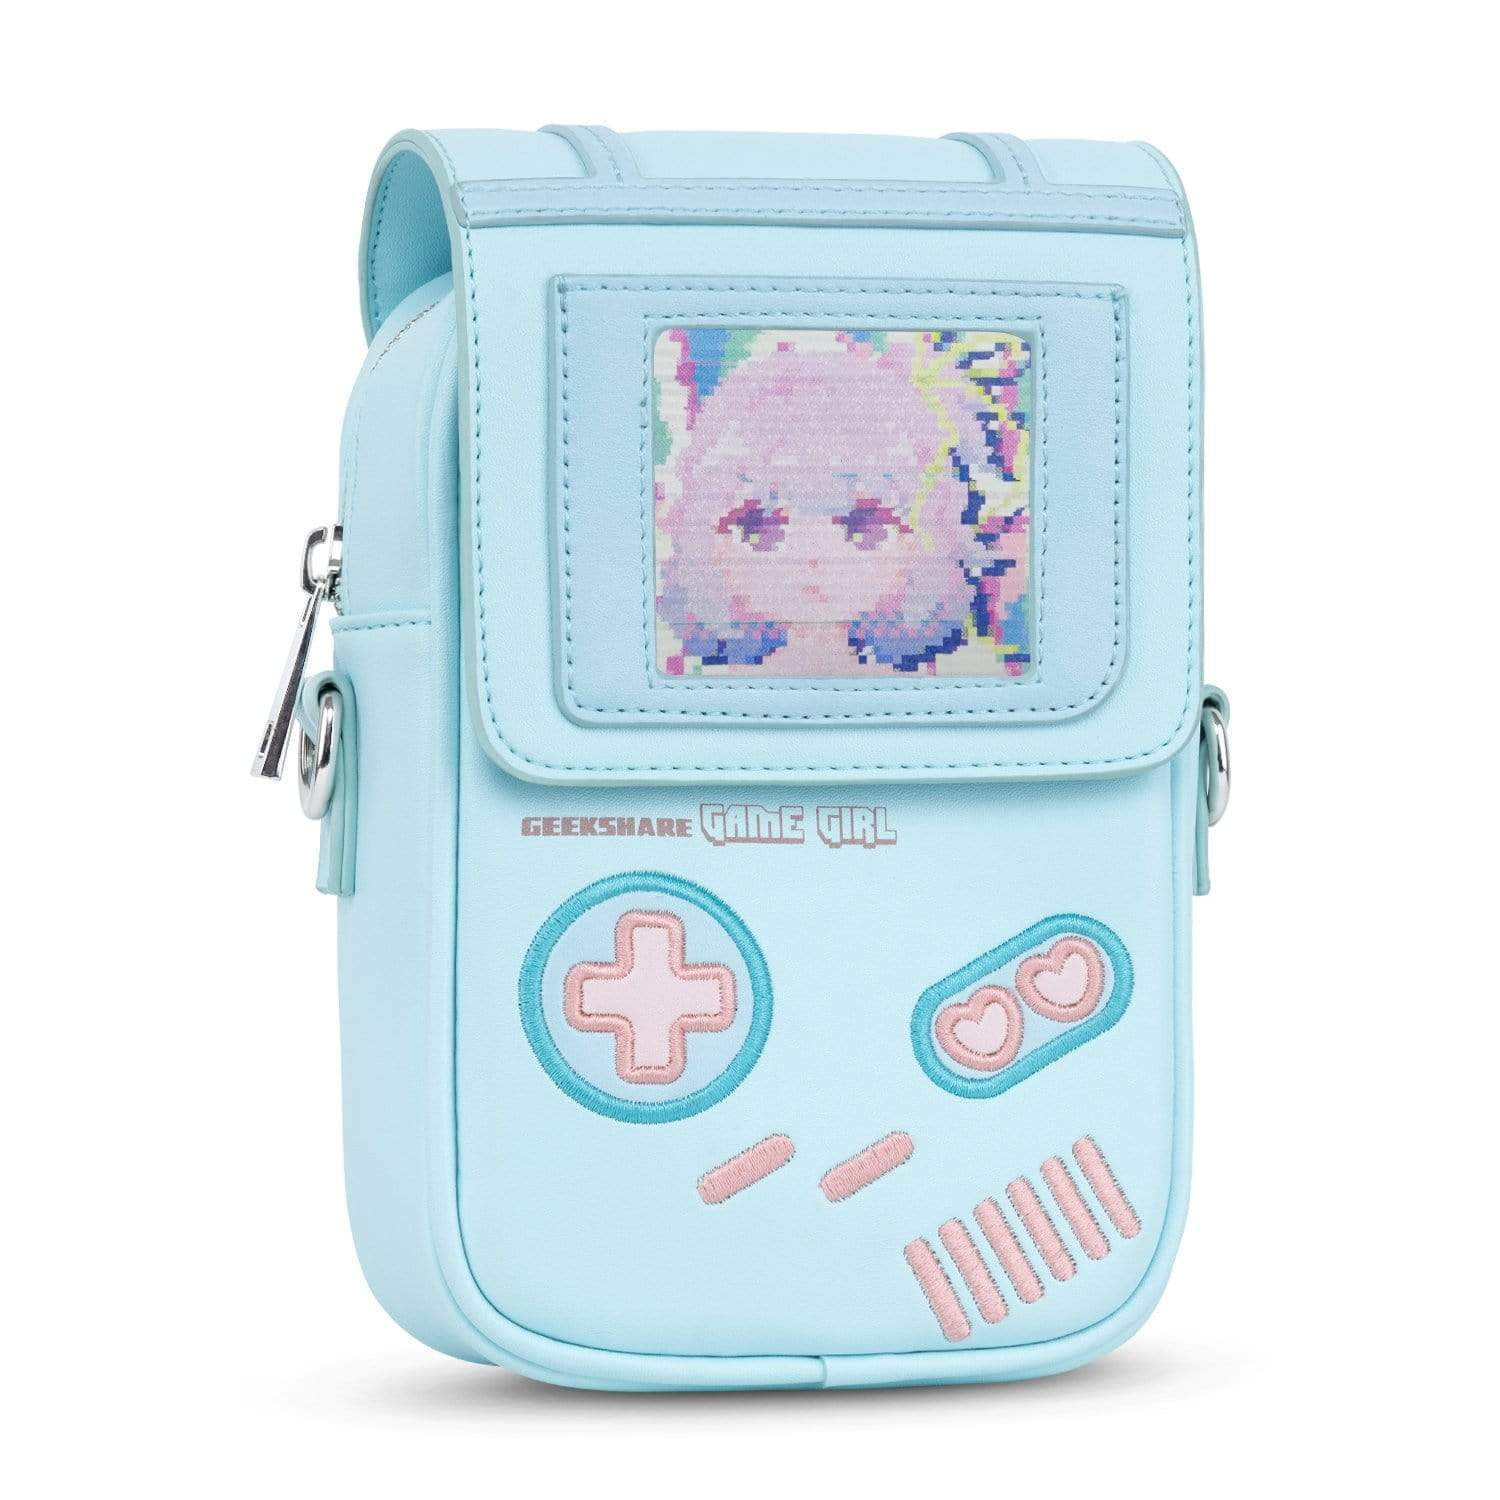 GeekShare Game Girl Crossbody Bag for Nintendo Switch 2017 Console Accessories Fashion & Light, Blue